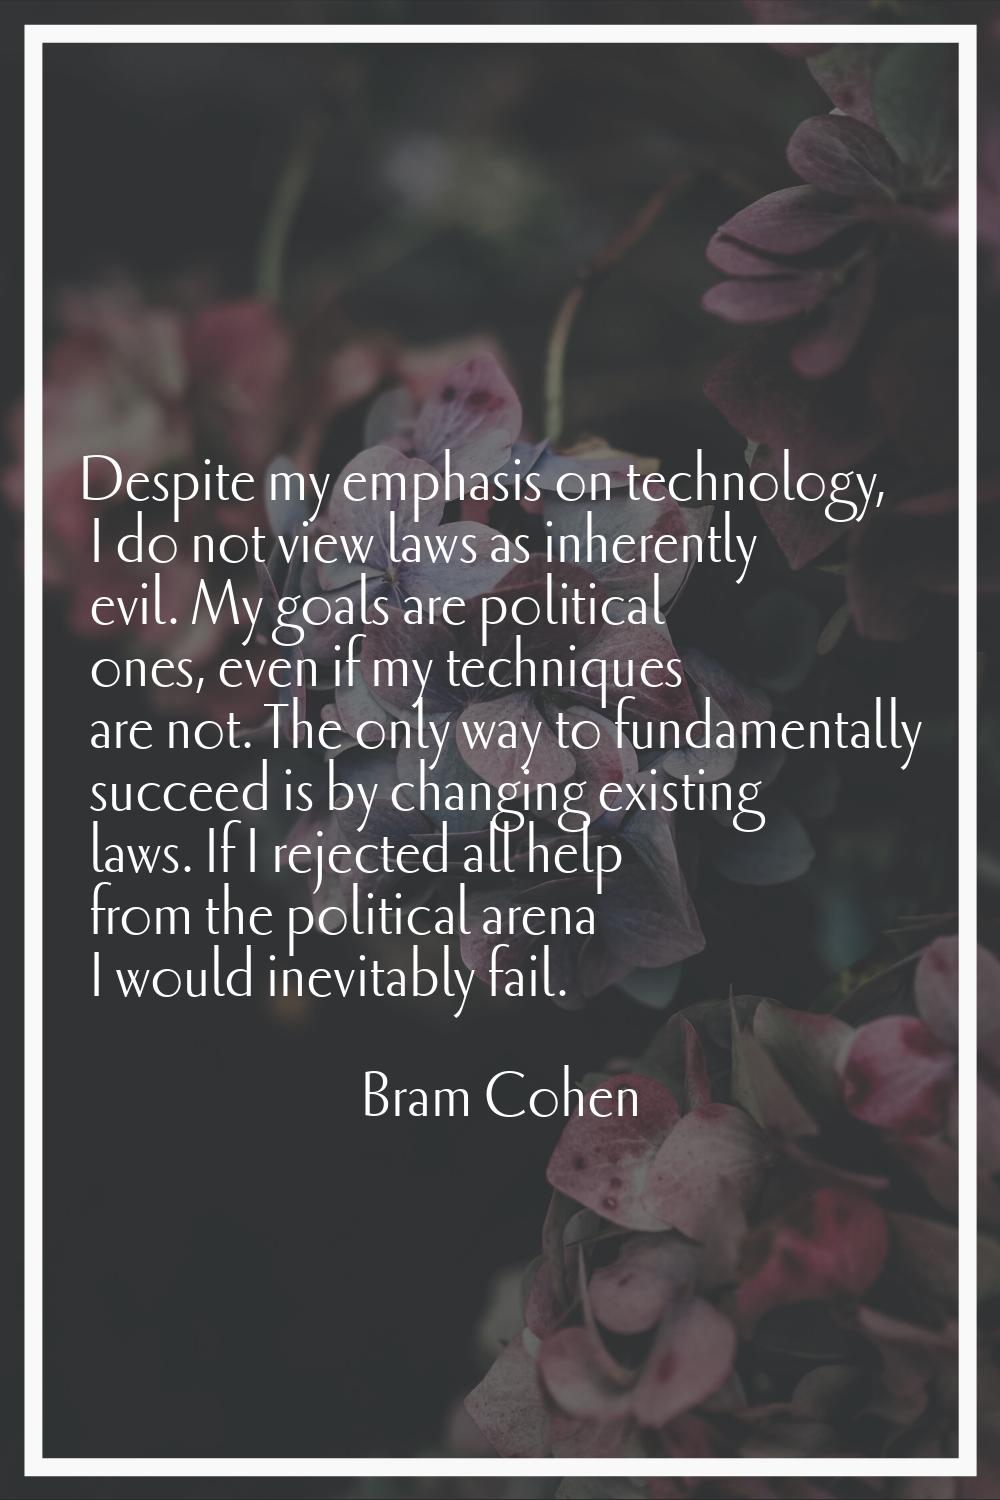 Despite my emphasis on technology, I do not view laws as inherently evil. My goals are political on